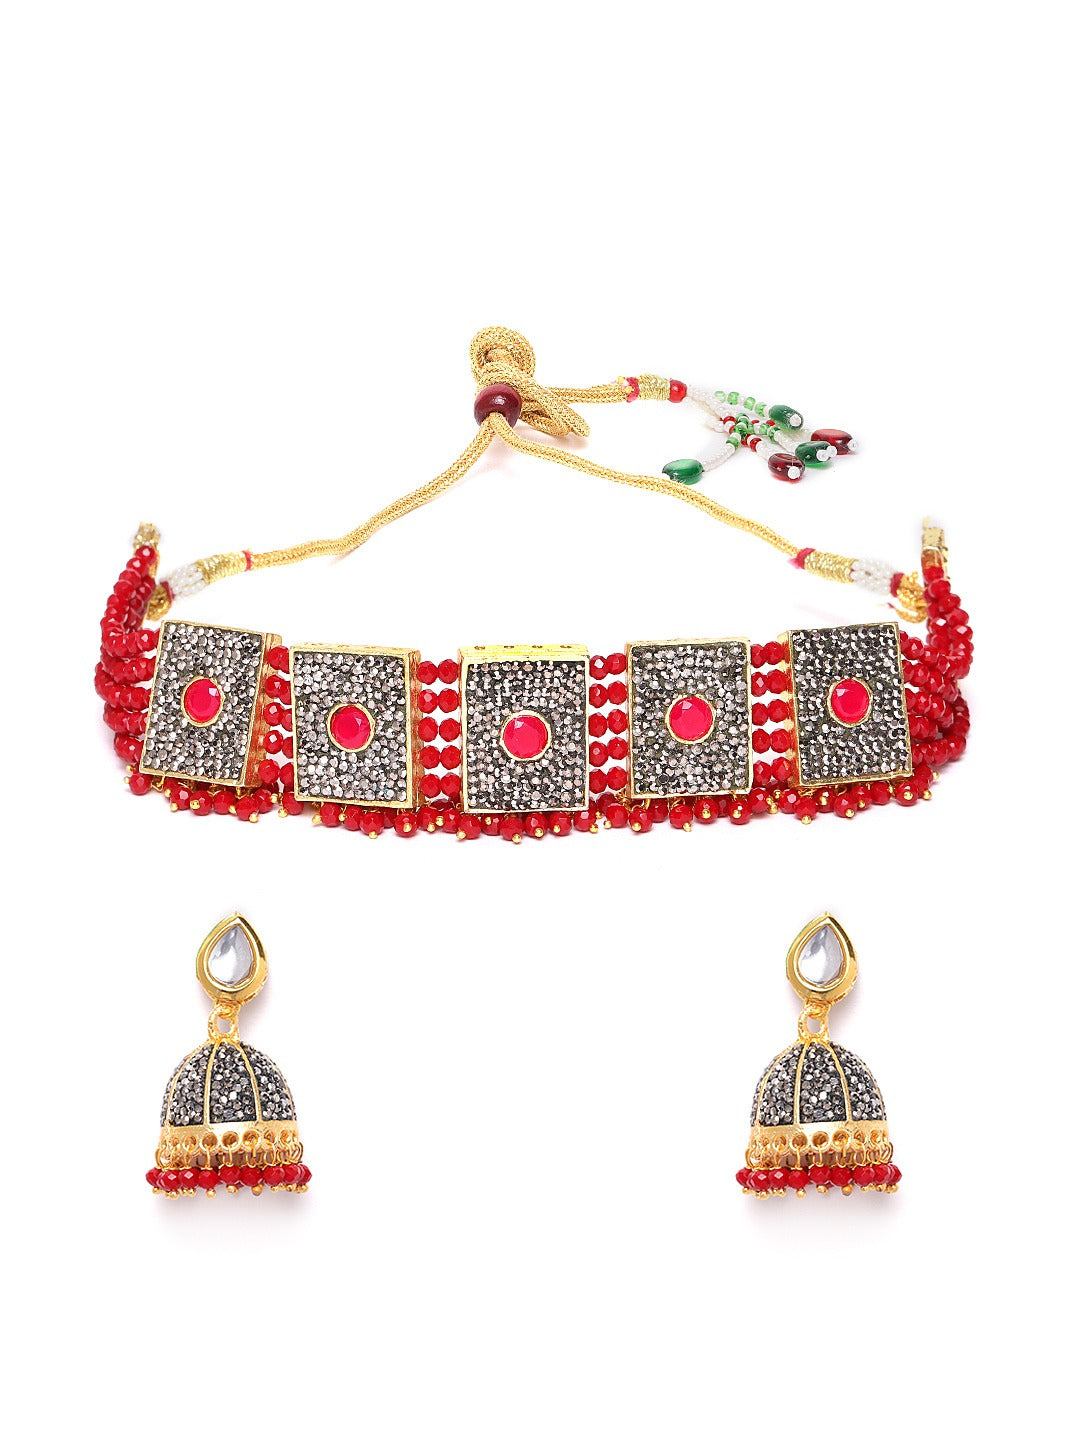 Red & Gunmetal-Toned Gold-Plated Stone-Studded Handcrafted Jewellery Set